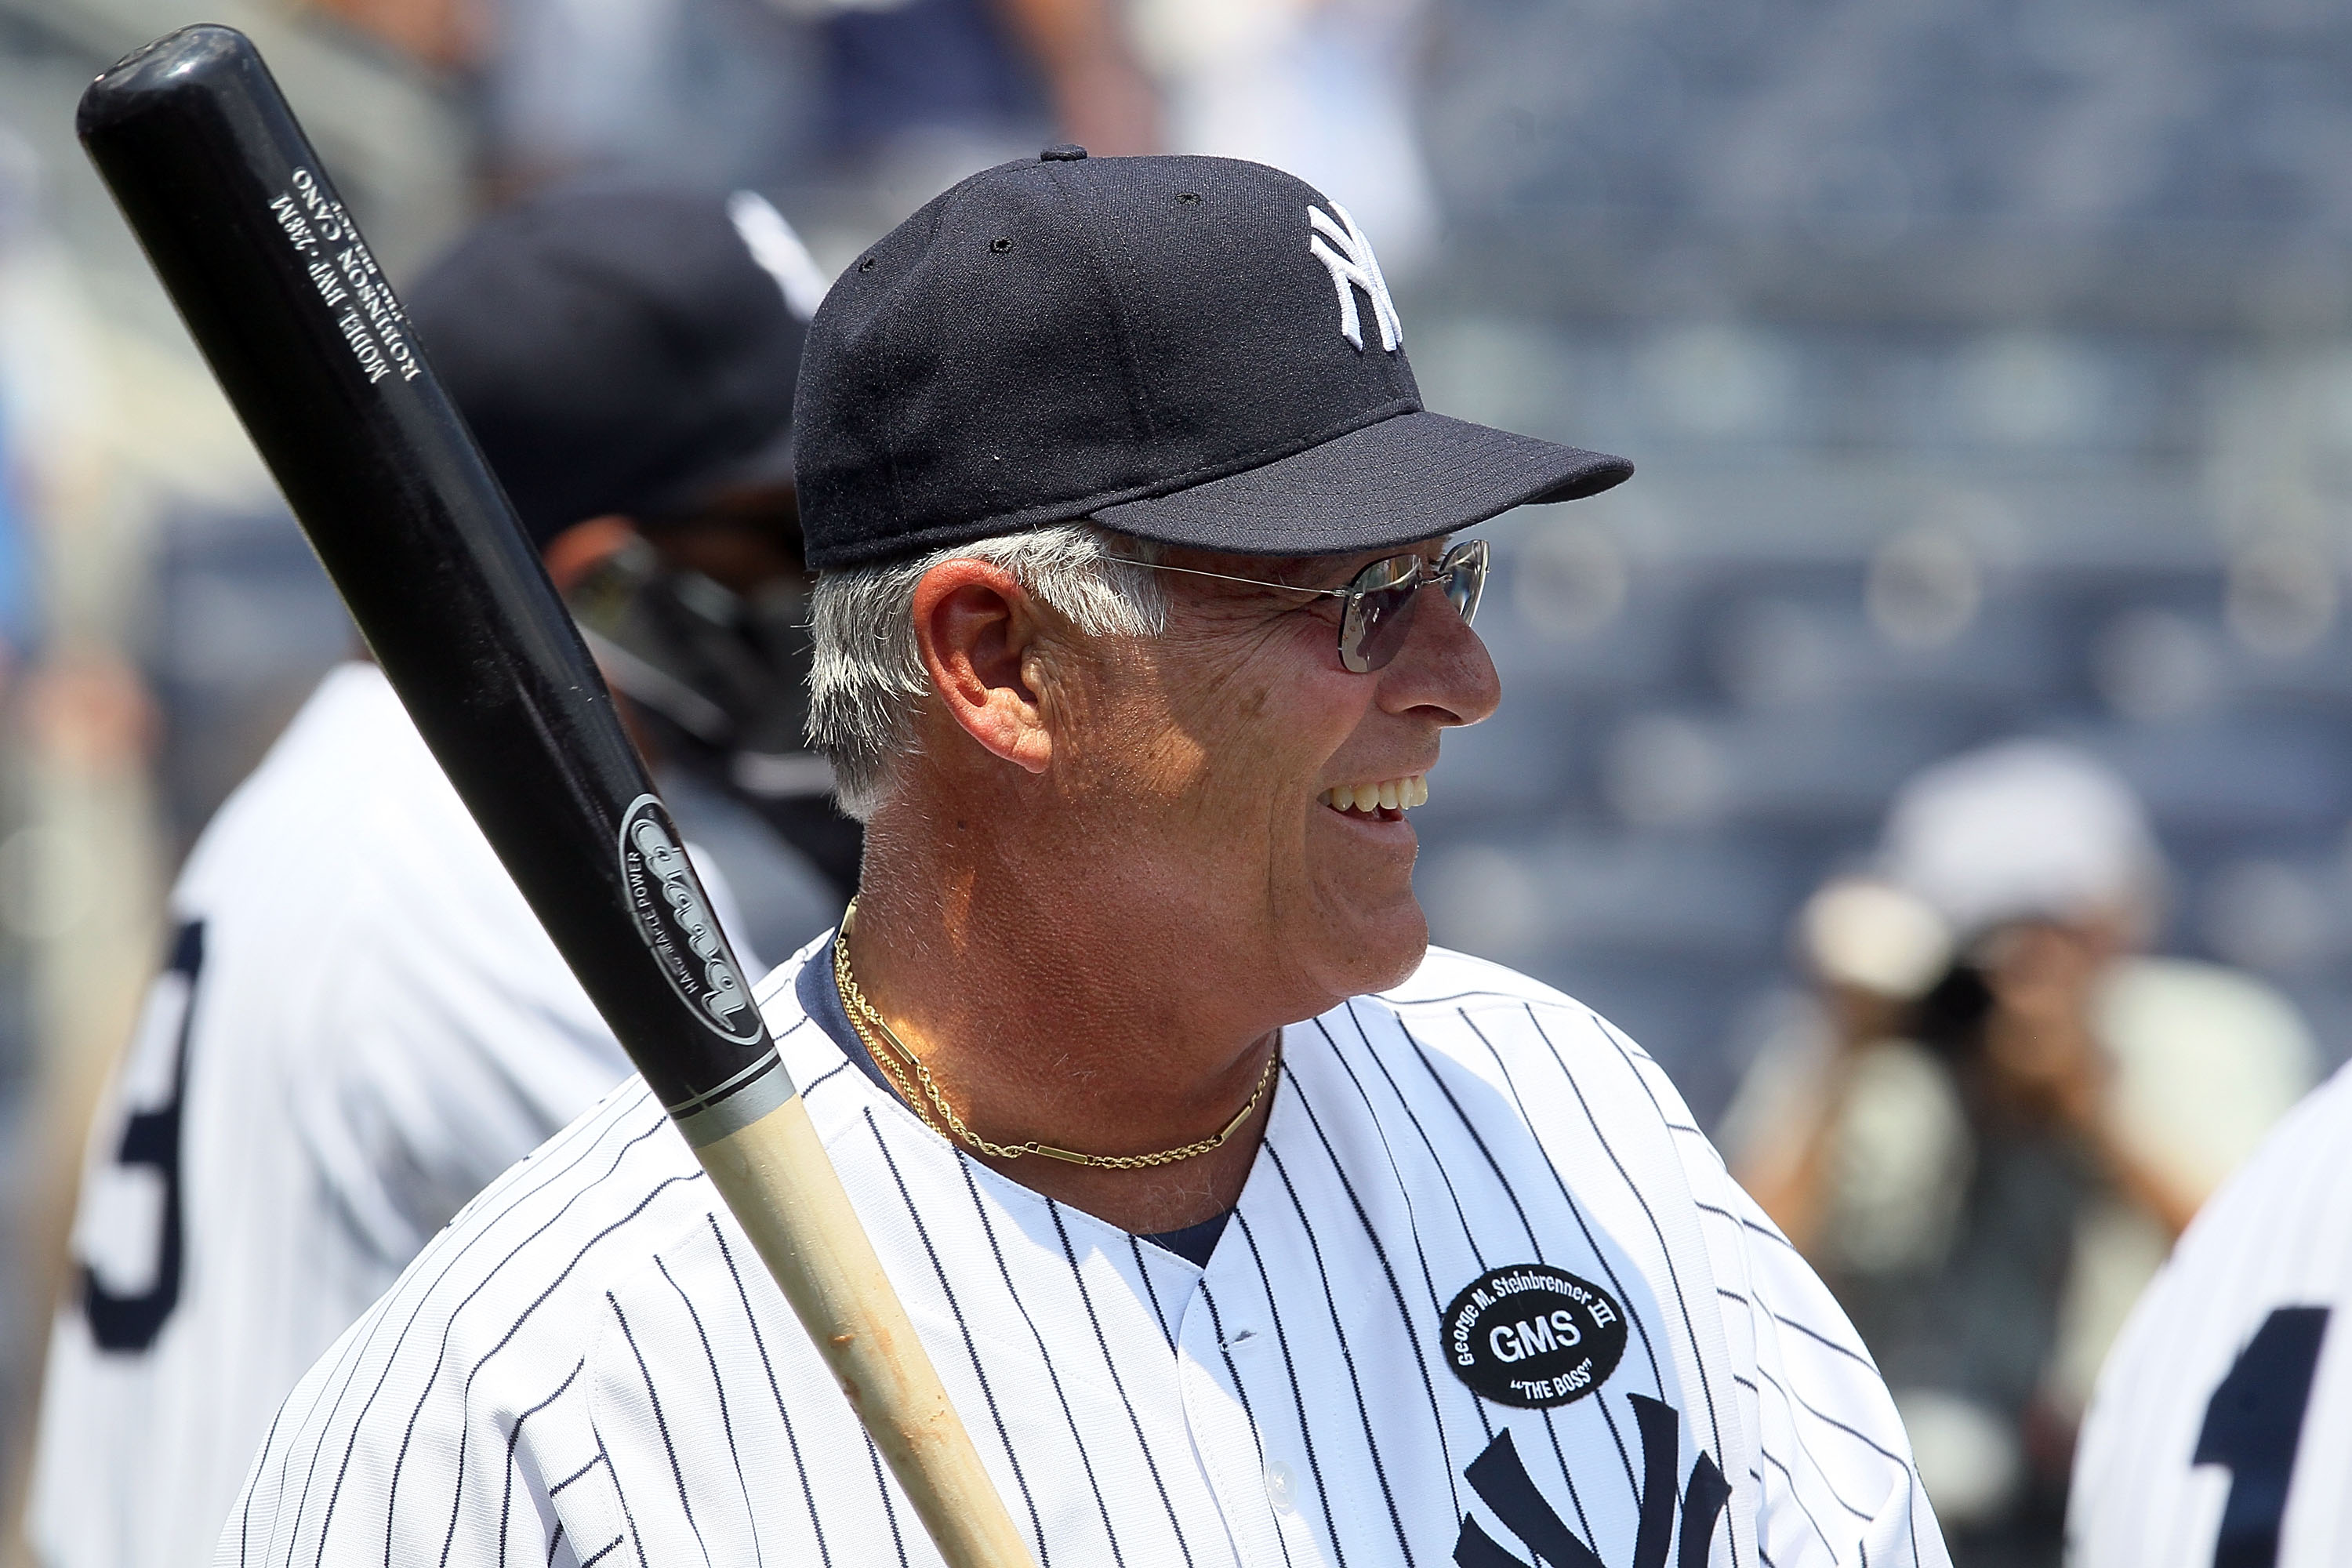 NEW YORK - JULY 17:  Former New York Yankee Bucky Dent warms up before the teams 64th Old-Timer's Day before the MLB game against the Tampa Bay Rays on July 17, 2010 at Yankee Stadium in the Bronx borough of New York City.  (Photo by Jim McIsaac/Getty Ima